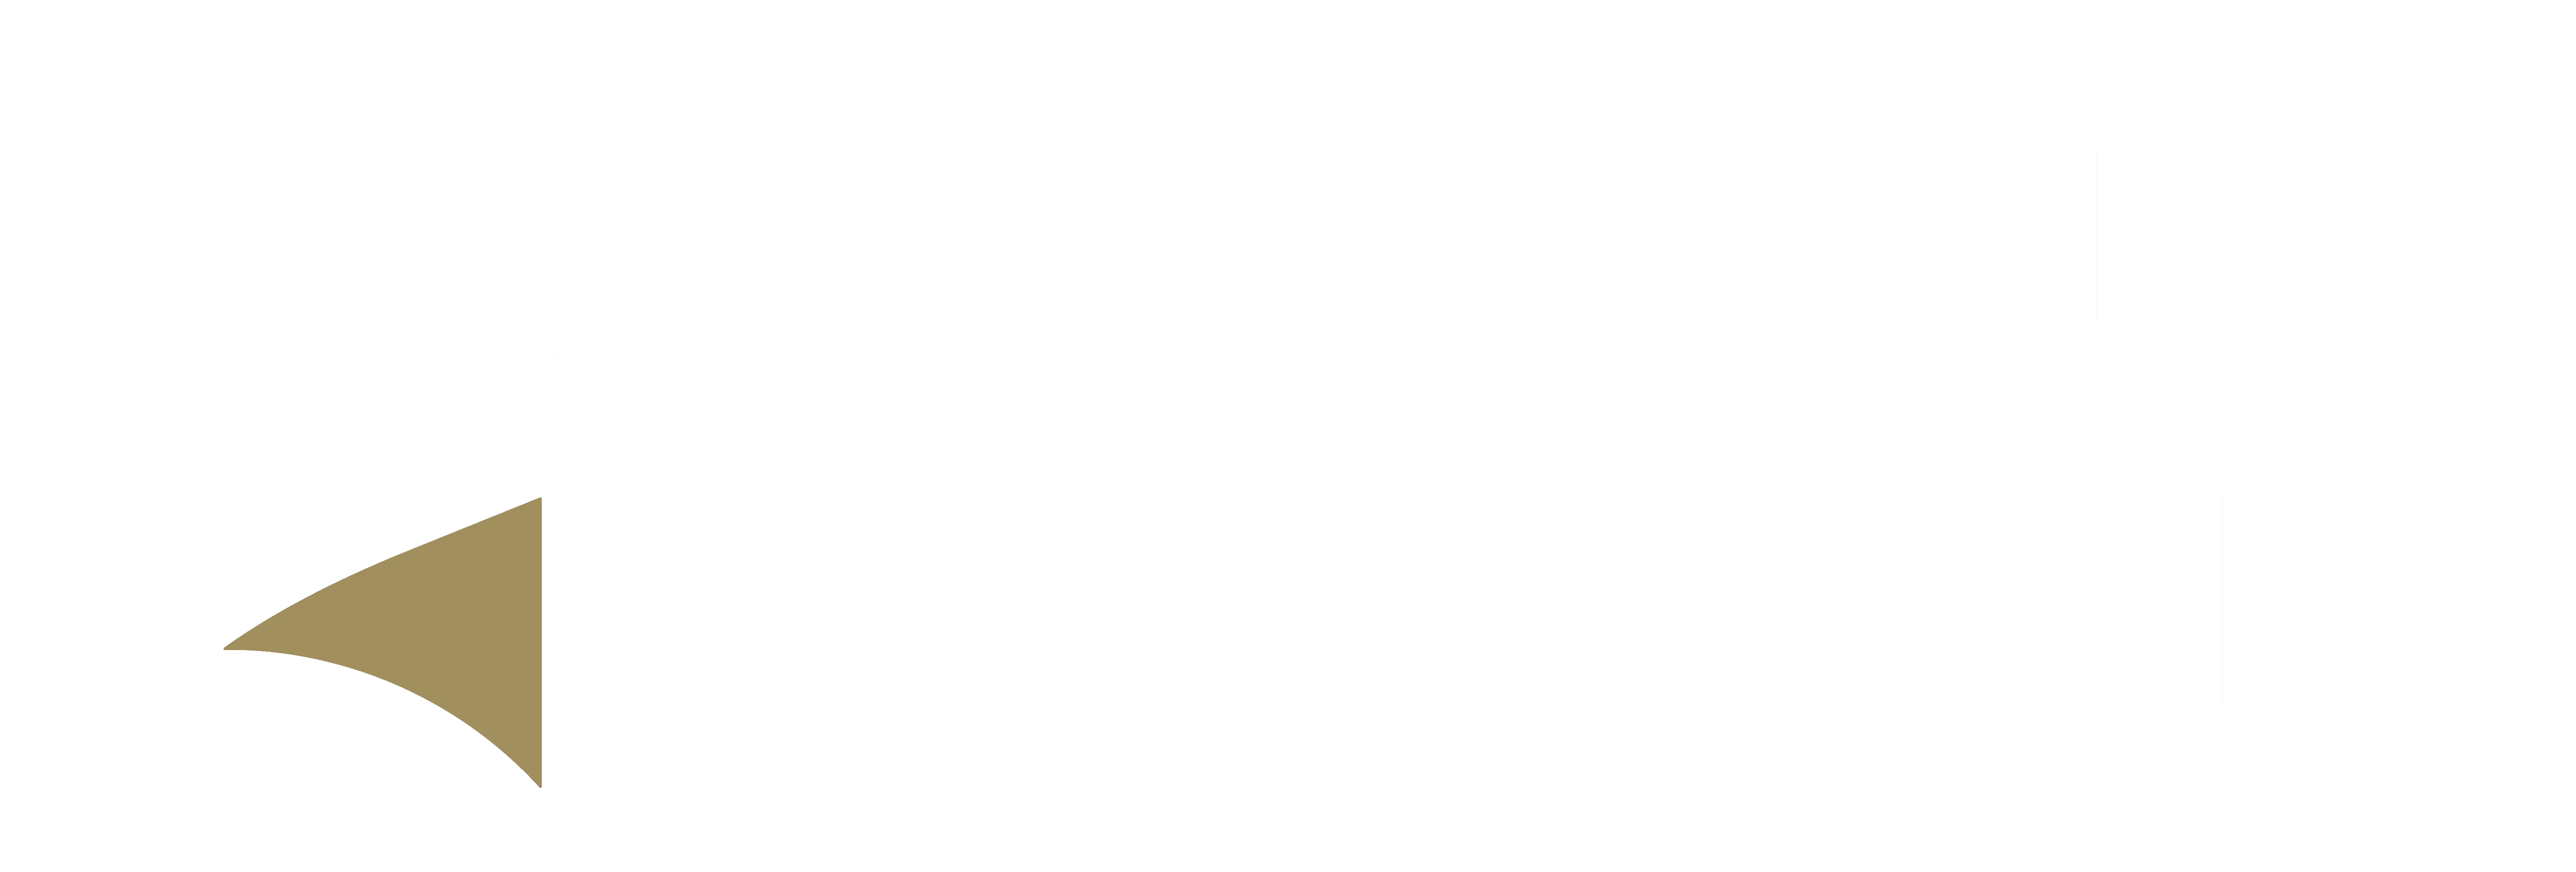 Consulting Vision